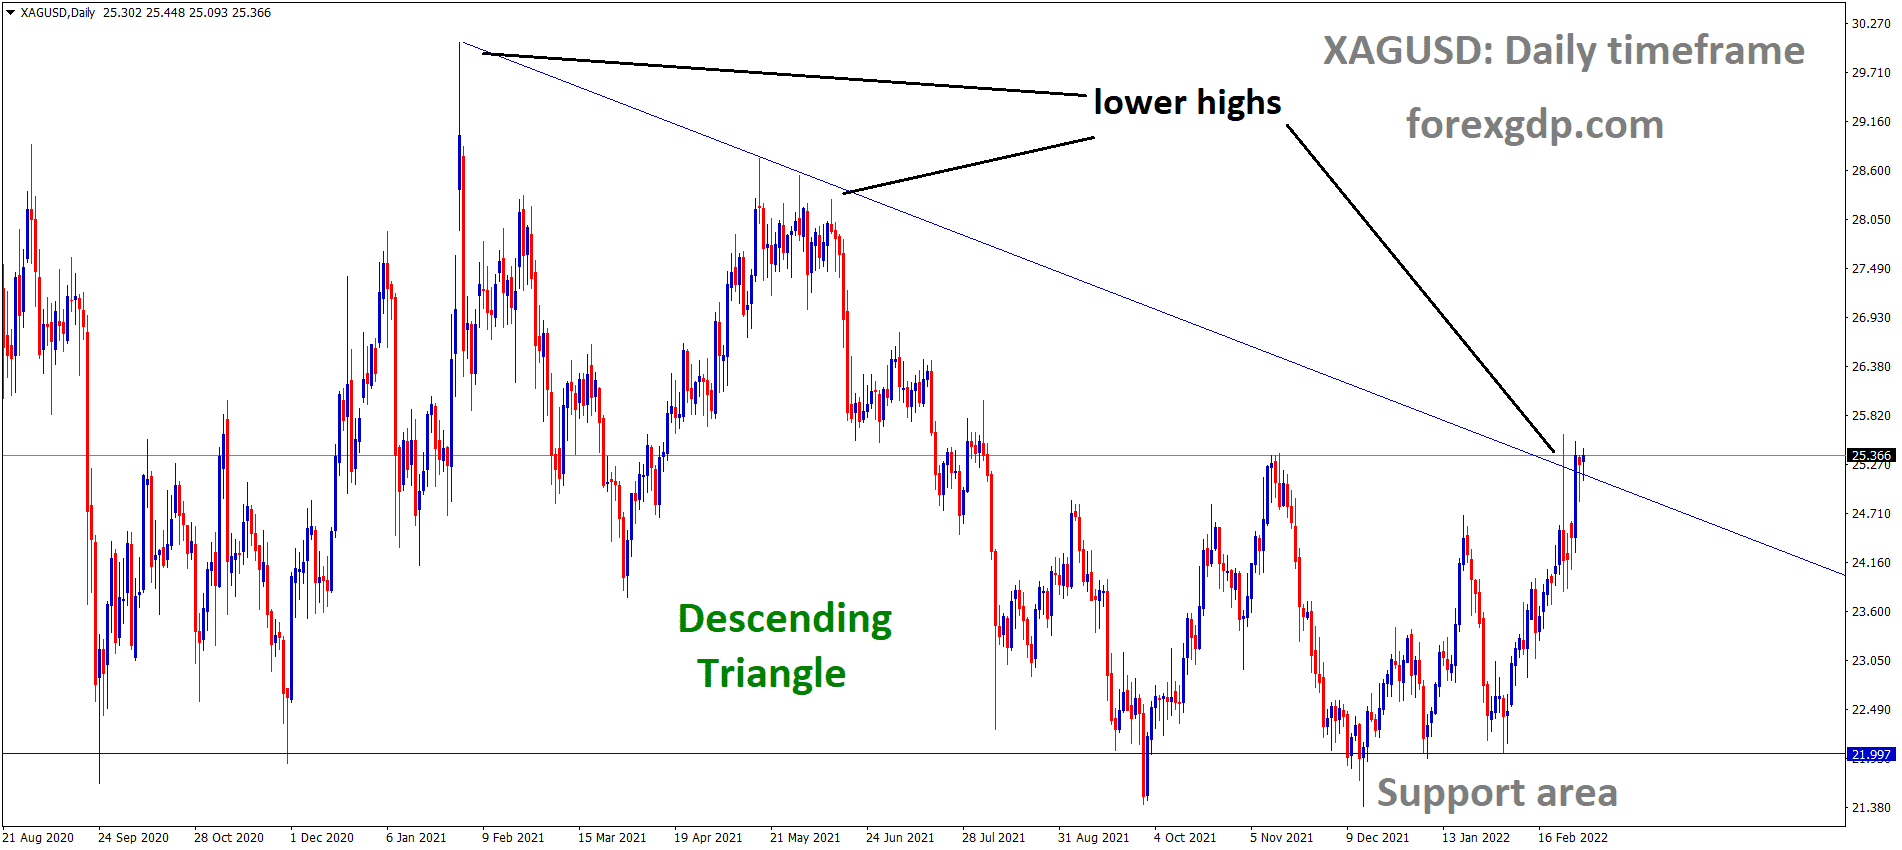 XAGUSD Silver Price is moving in the Descending triangle pattern and the market has reached the lower high area of the Triangle pattern.